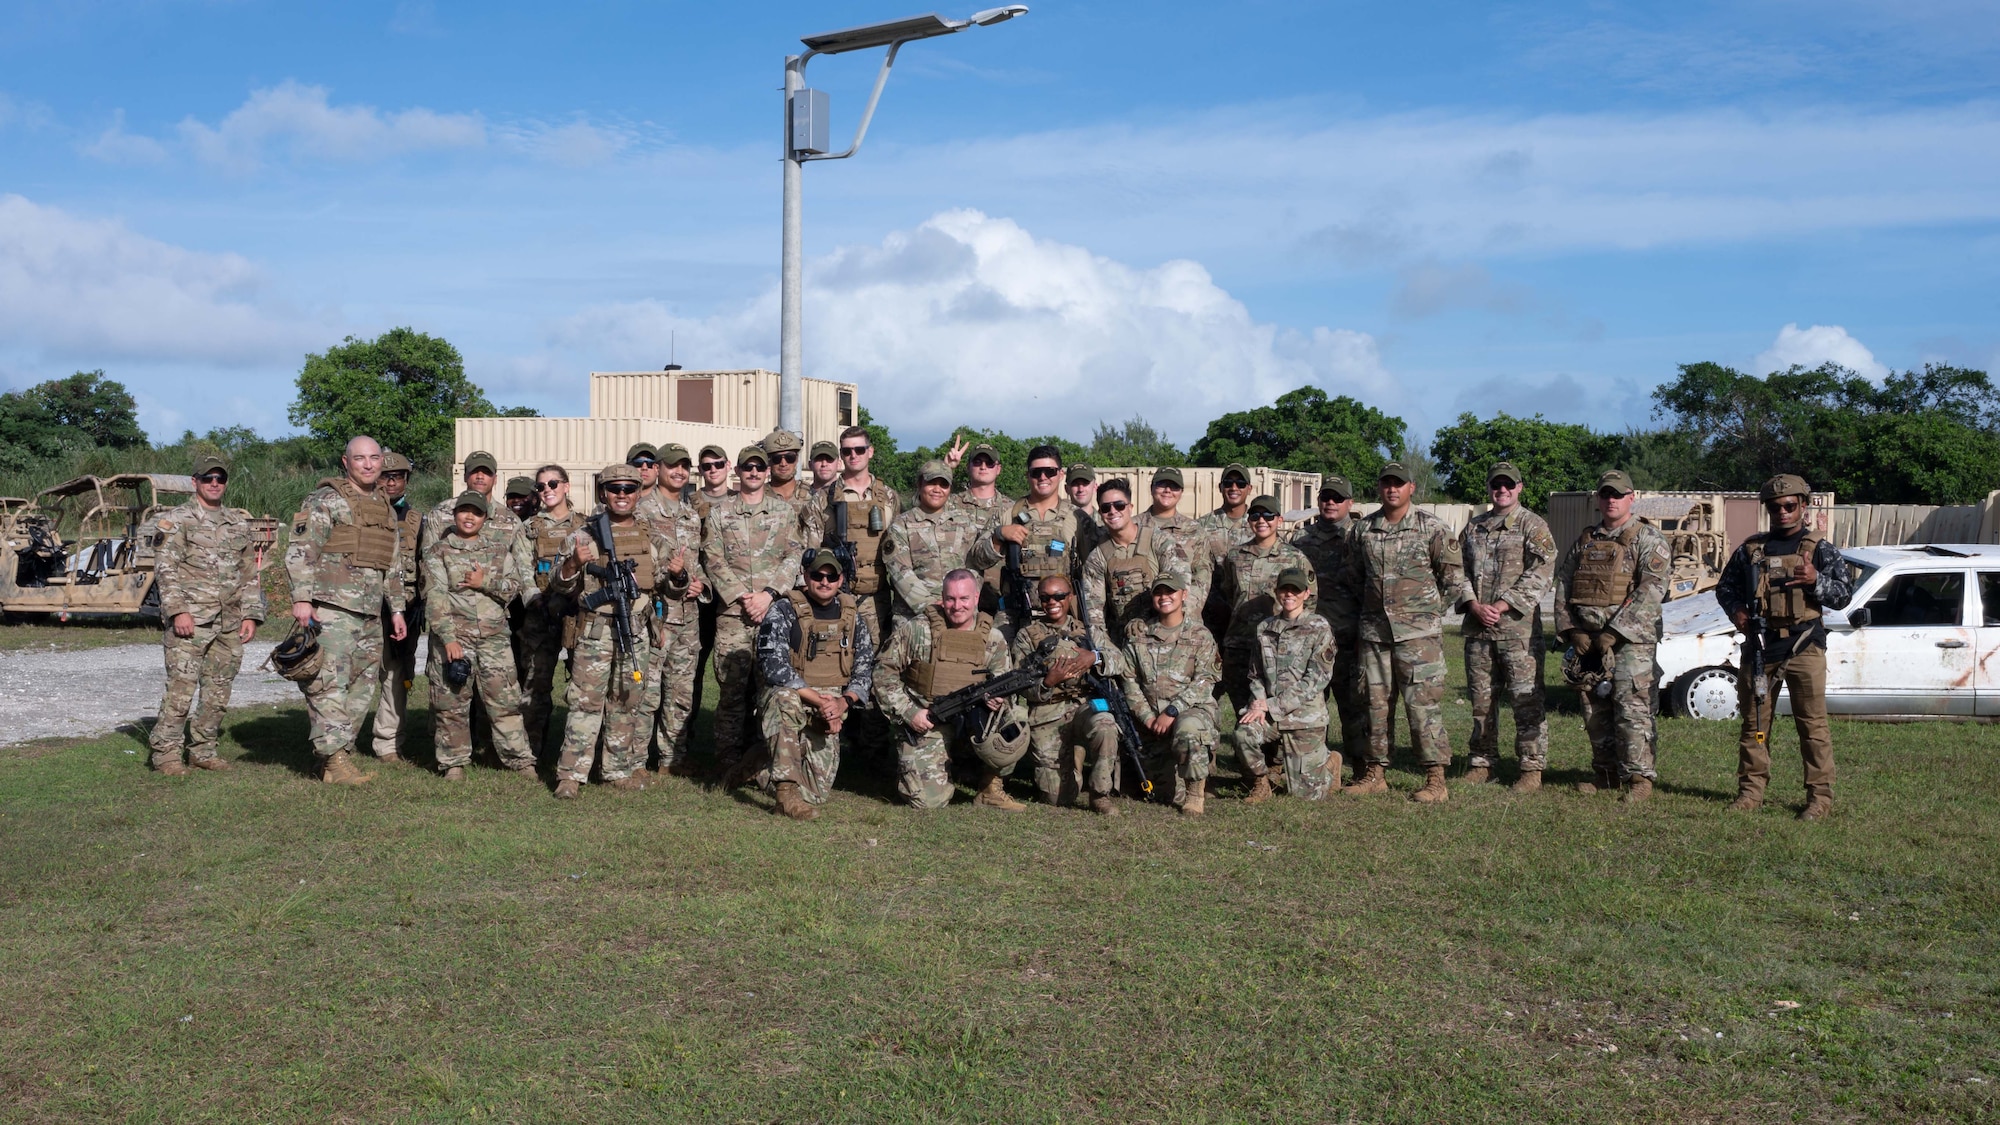 U.S. Air Force Chief Master Sgt. David R. Wolfe, Pacific Air Forces command chief, poses with Airmen with the 36th Security Forces Squadron at Andersen Air Force Base, Guam, April 14, 2022.